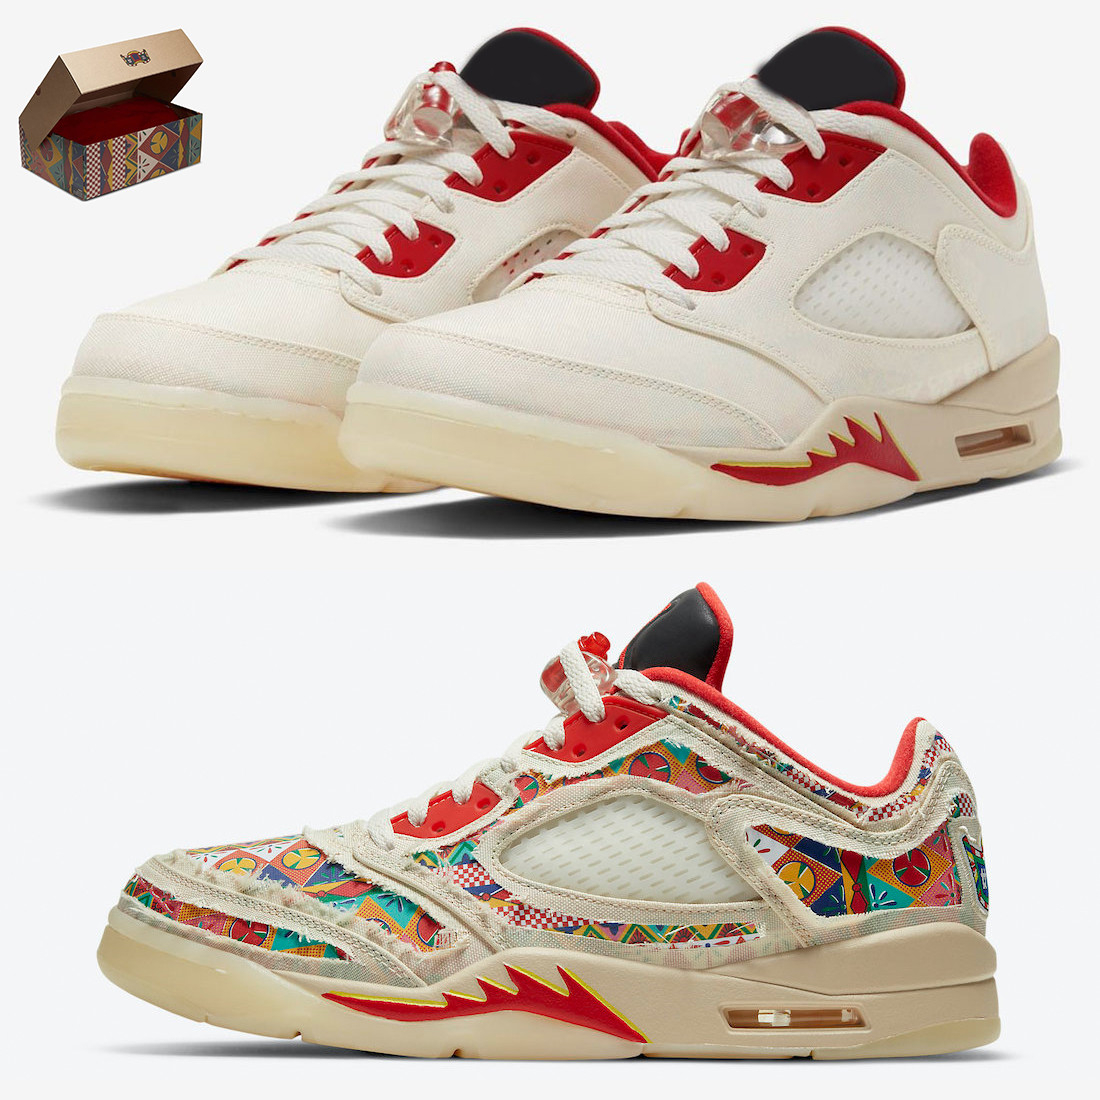 

Authentic 5 Low Chinese New Year Shoes CNY Sail Chile Red-Opti Yellow-Pearl White Outdoor Sports Trainers Sneakers With Original Box US7-13, Customize